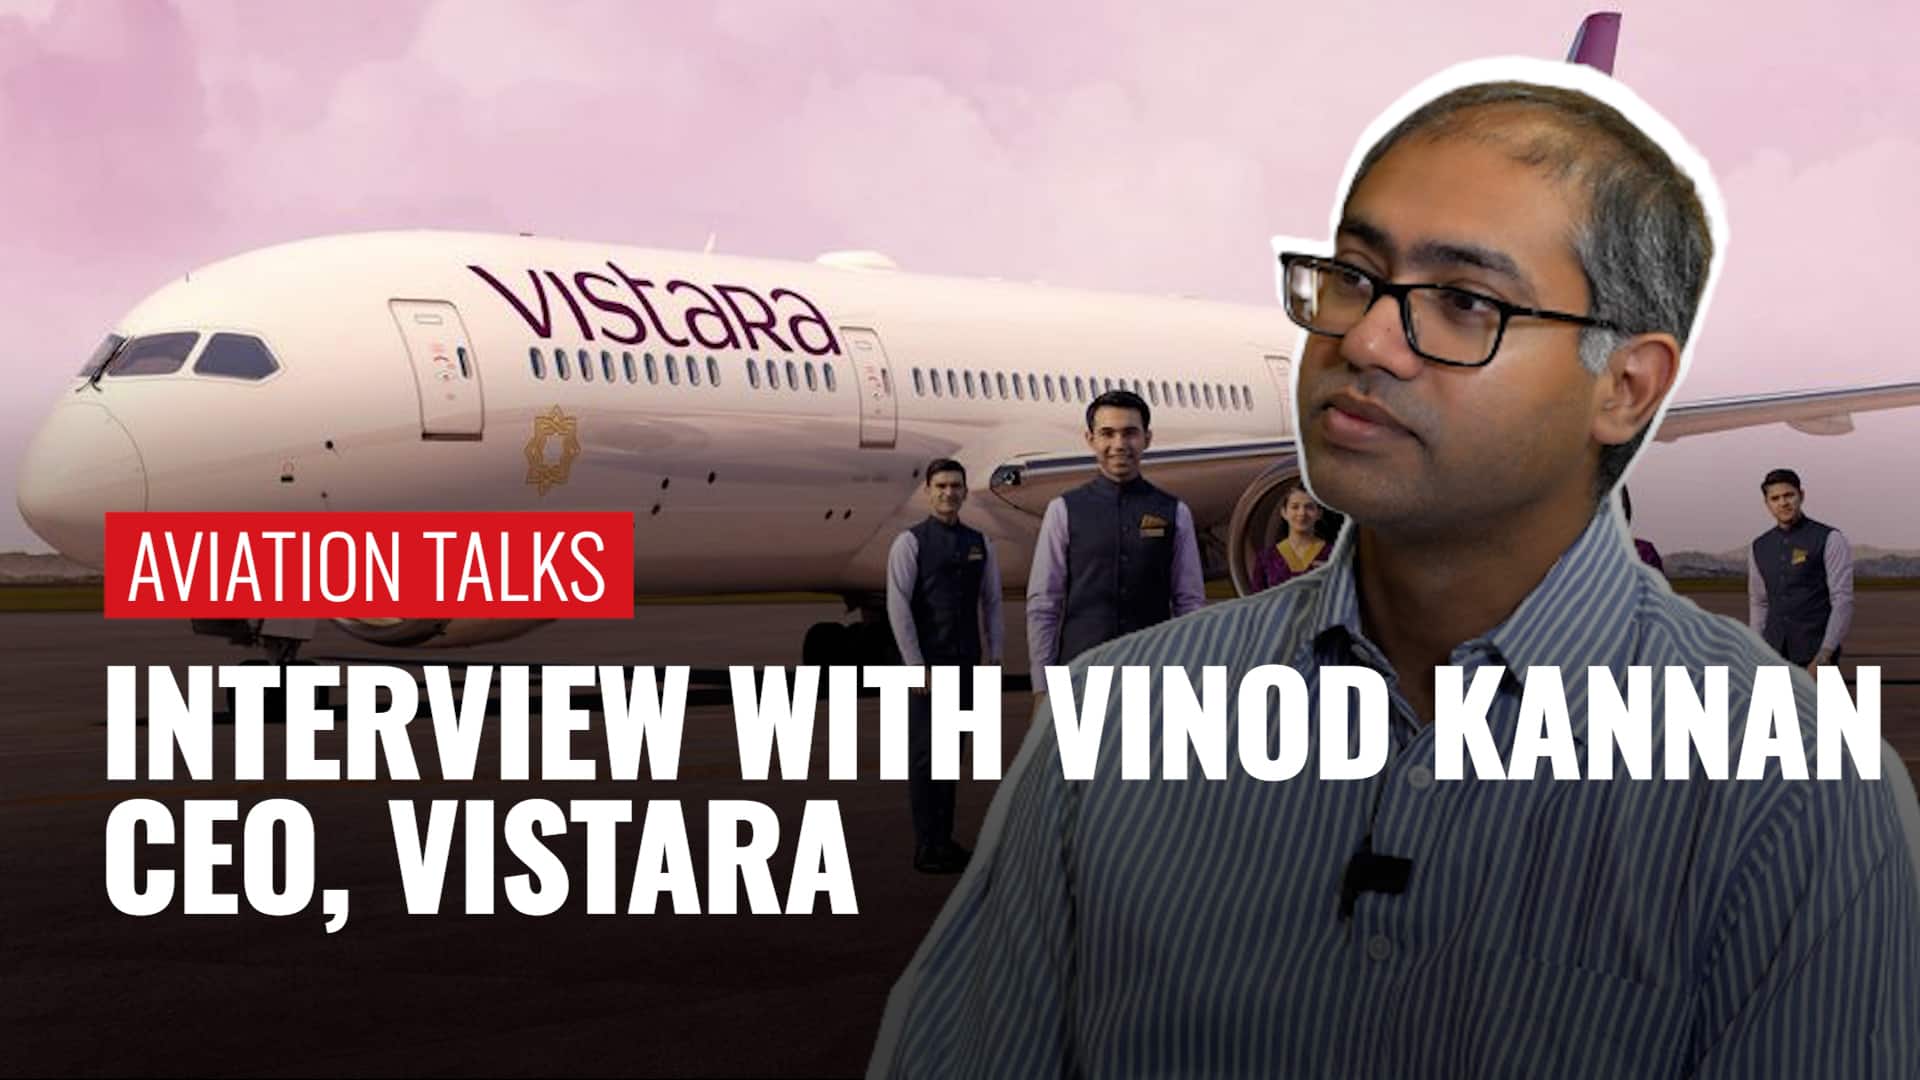 Exclusive Conversation With Vistara CEO On Merger With Air India, Fleet Expansion And More